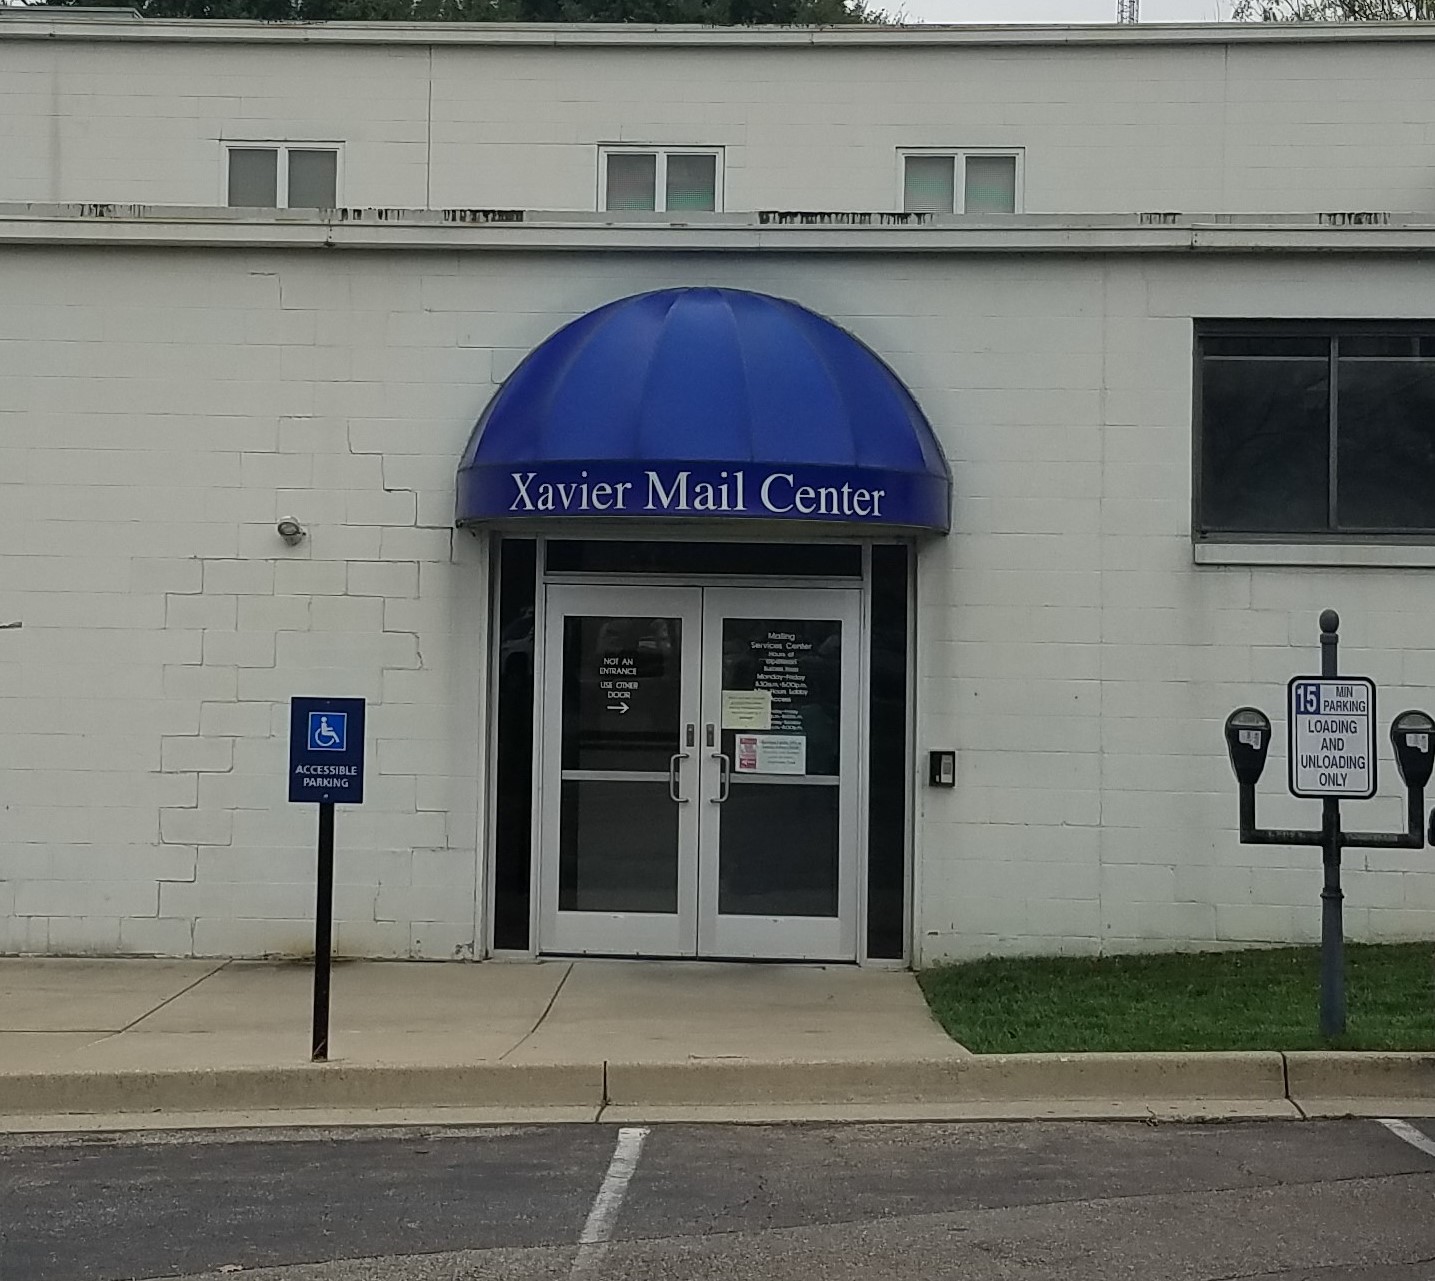 Exterior Photo of the Front Door to the XU Mailing Center